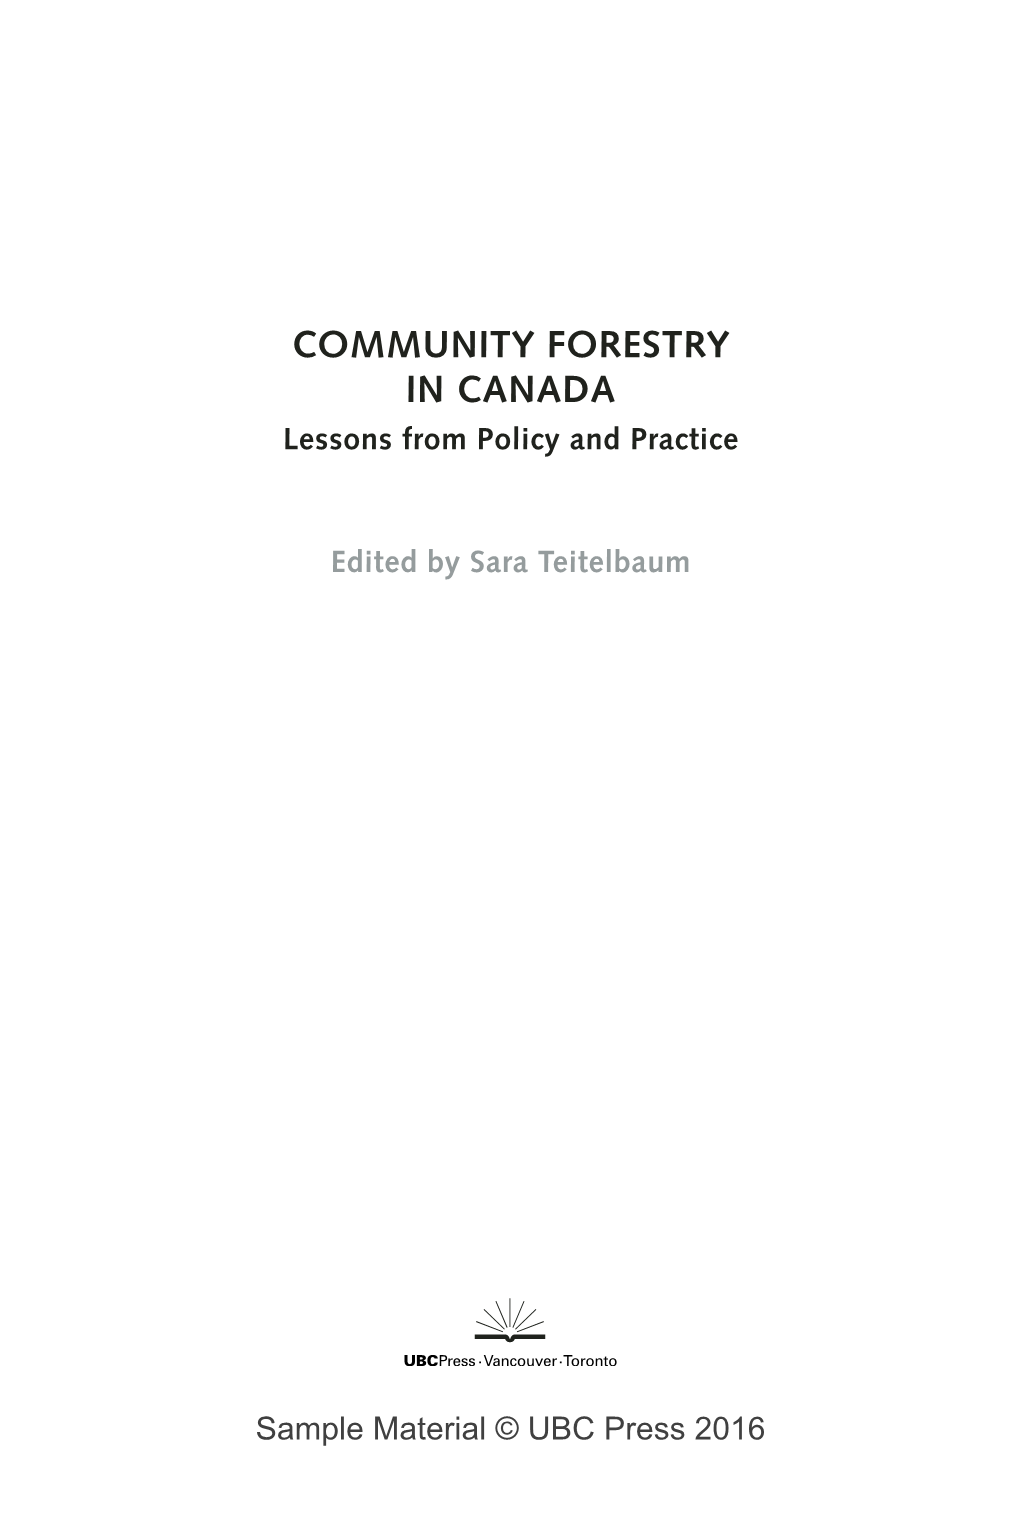 COMMUNITY FORESTRY in CANADA Lessons from Policy and Practice